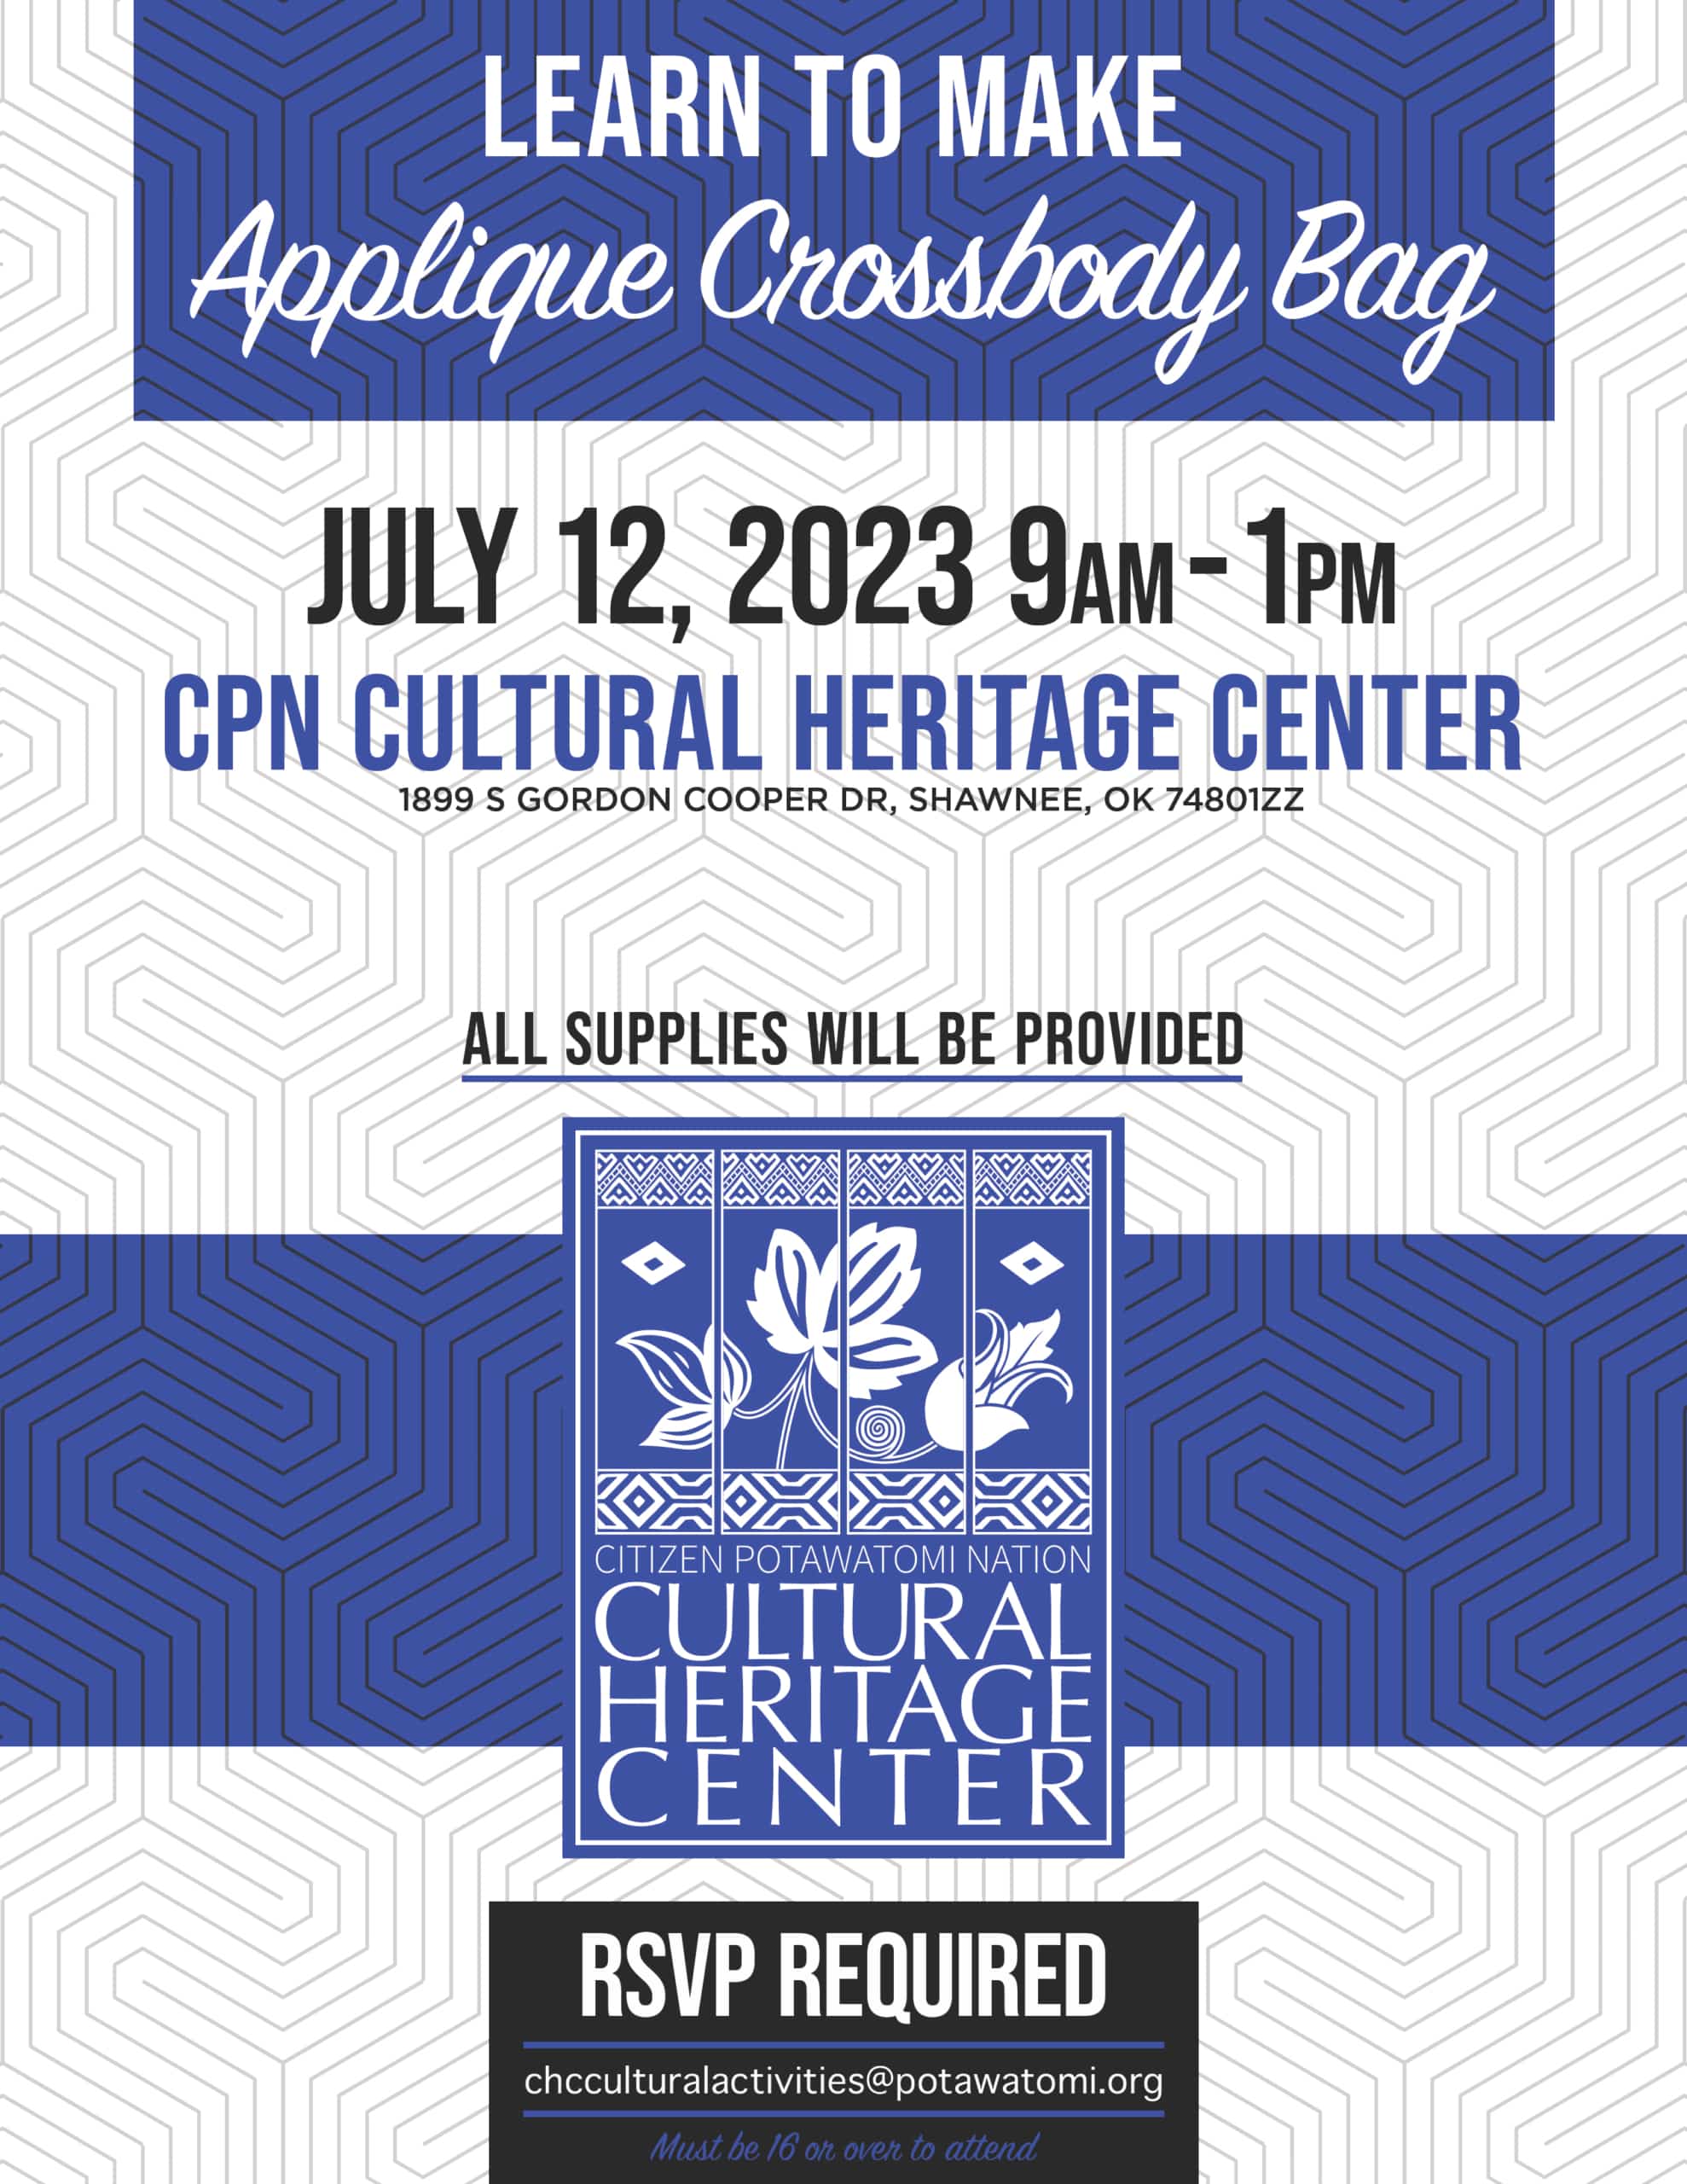 Blue and white boxes with black geometric designs frame the event description for the Applique Crossbody Bag class on July 12, 2023, at the Cultural Heritage Center.